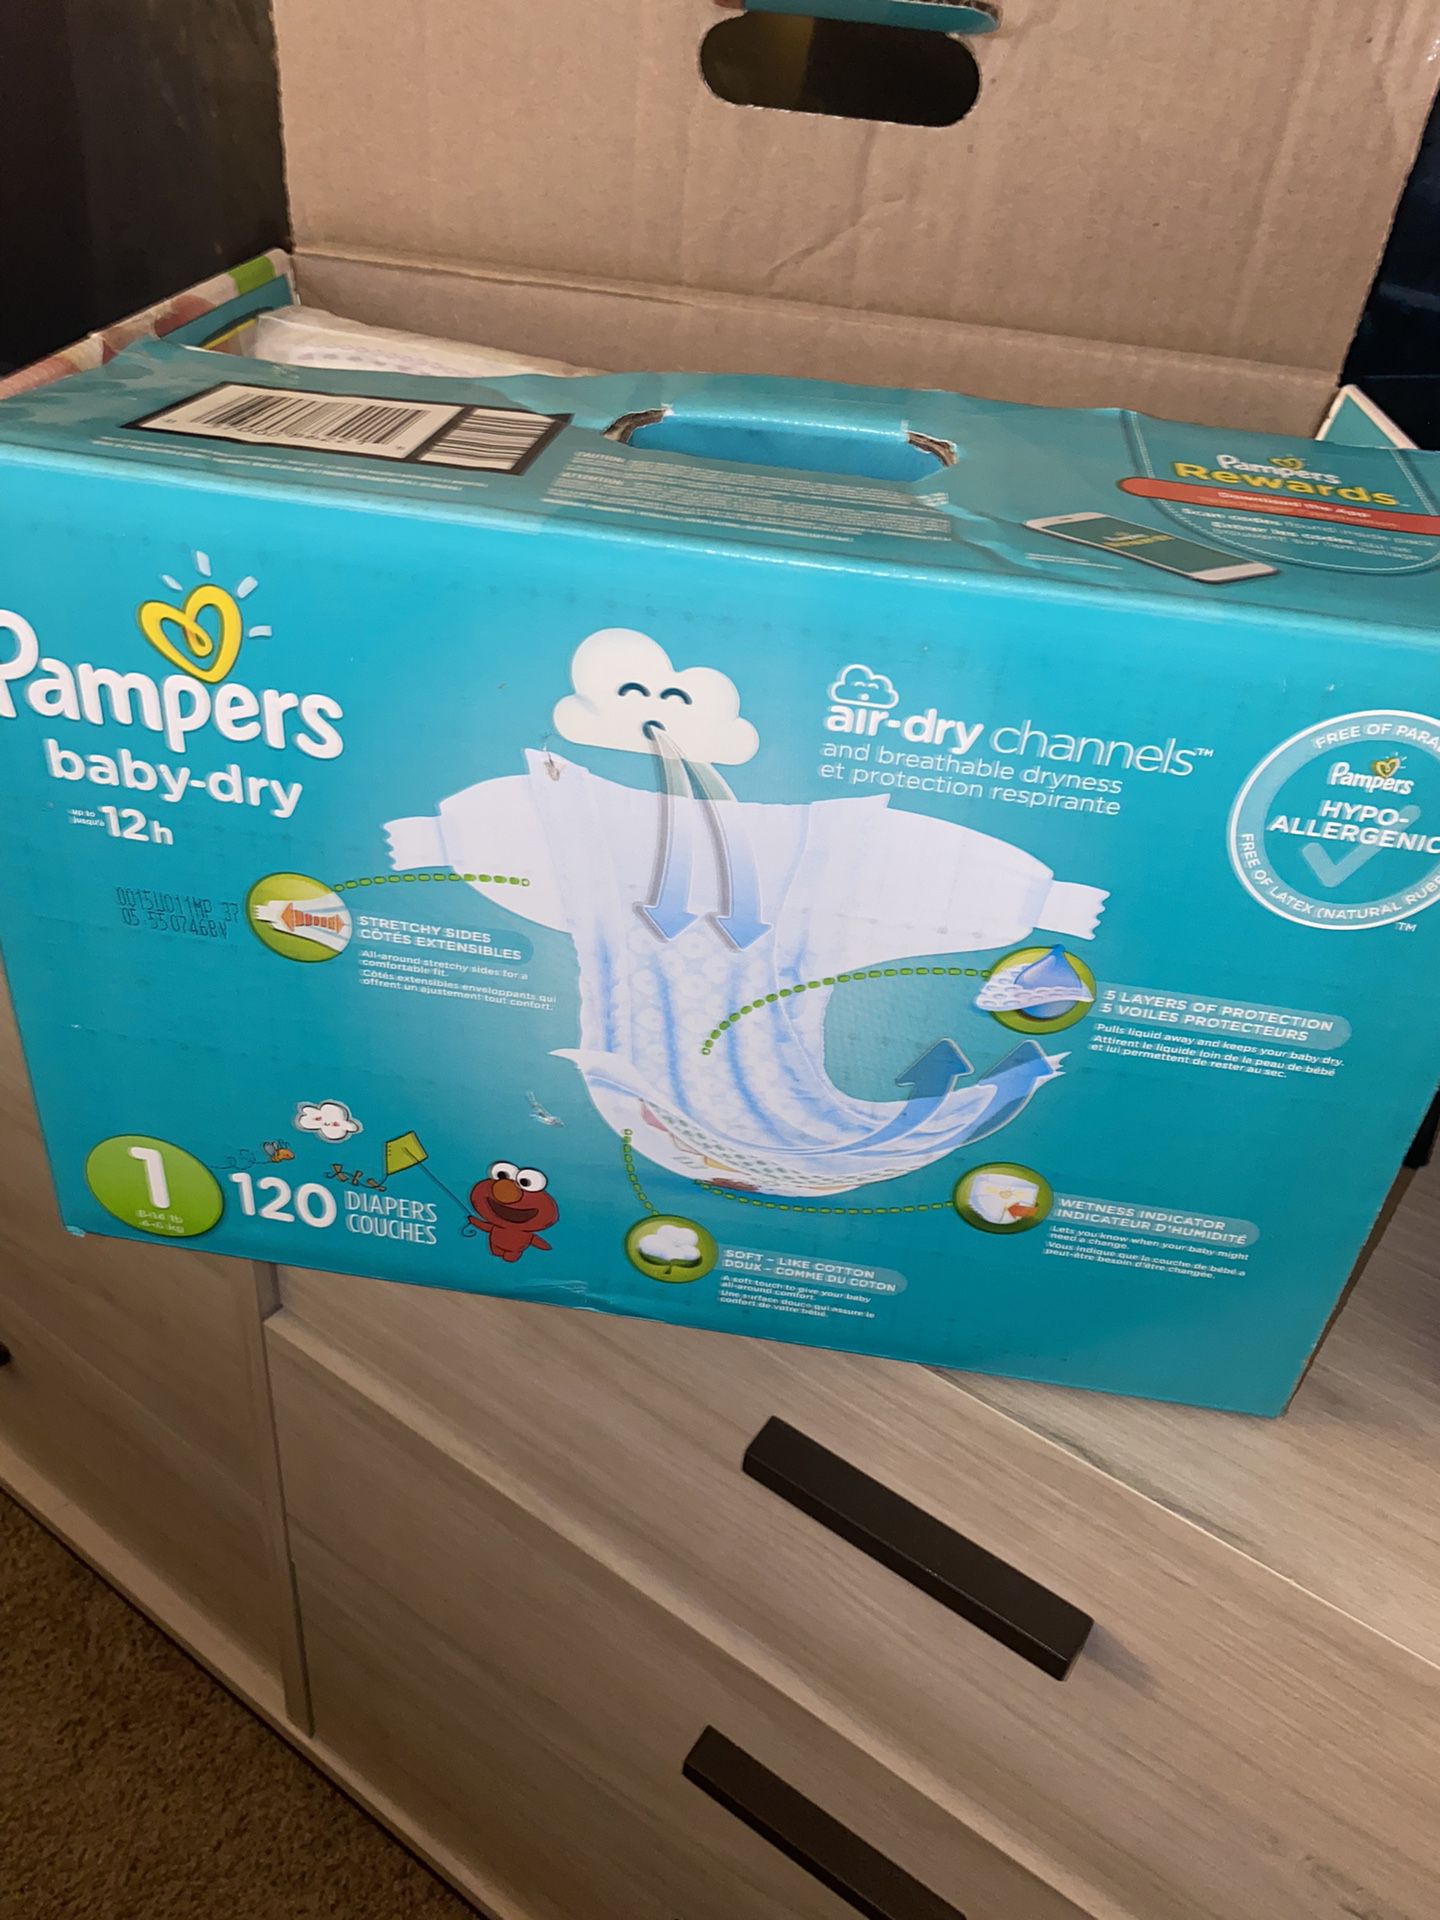 Pampers Size 1 